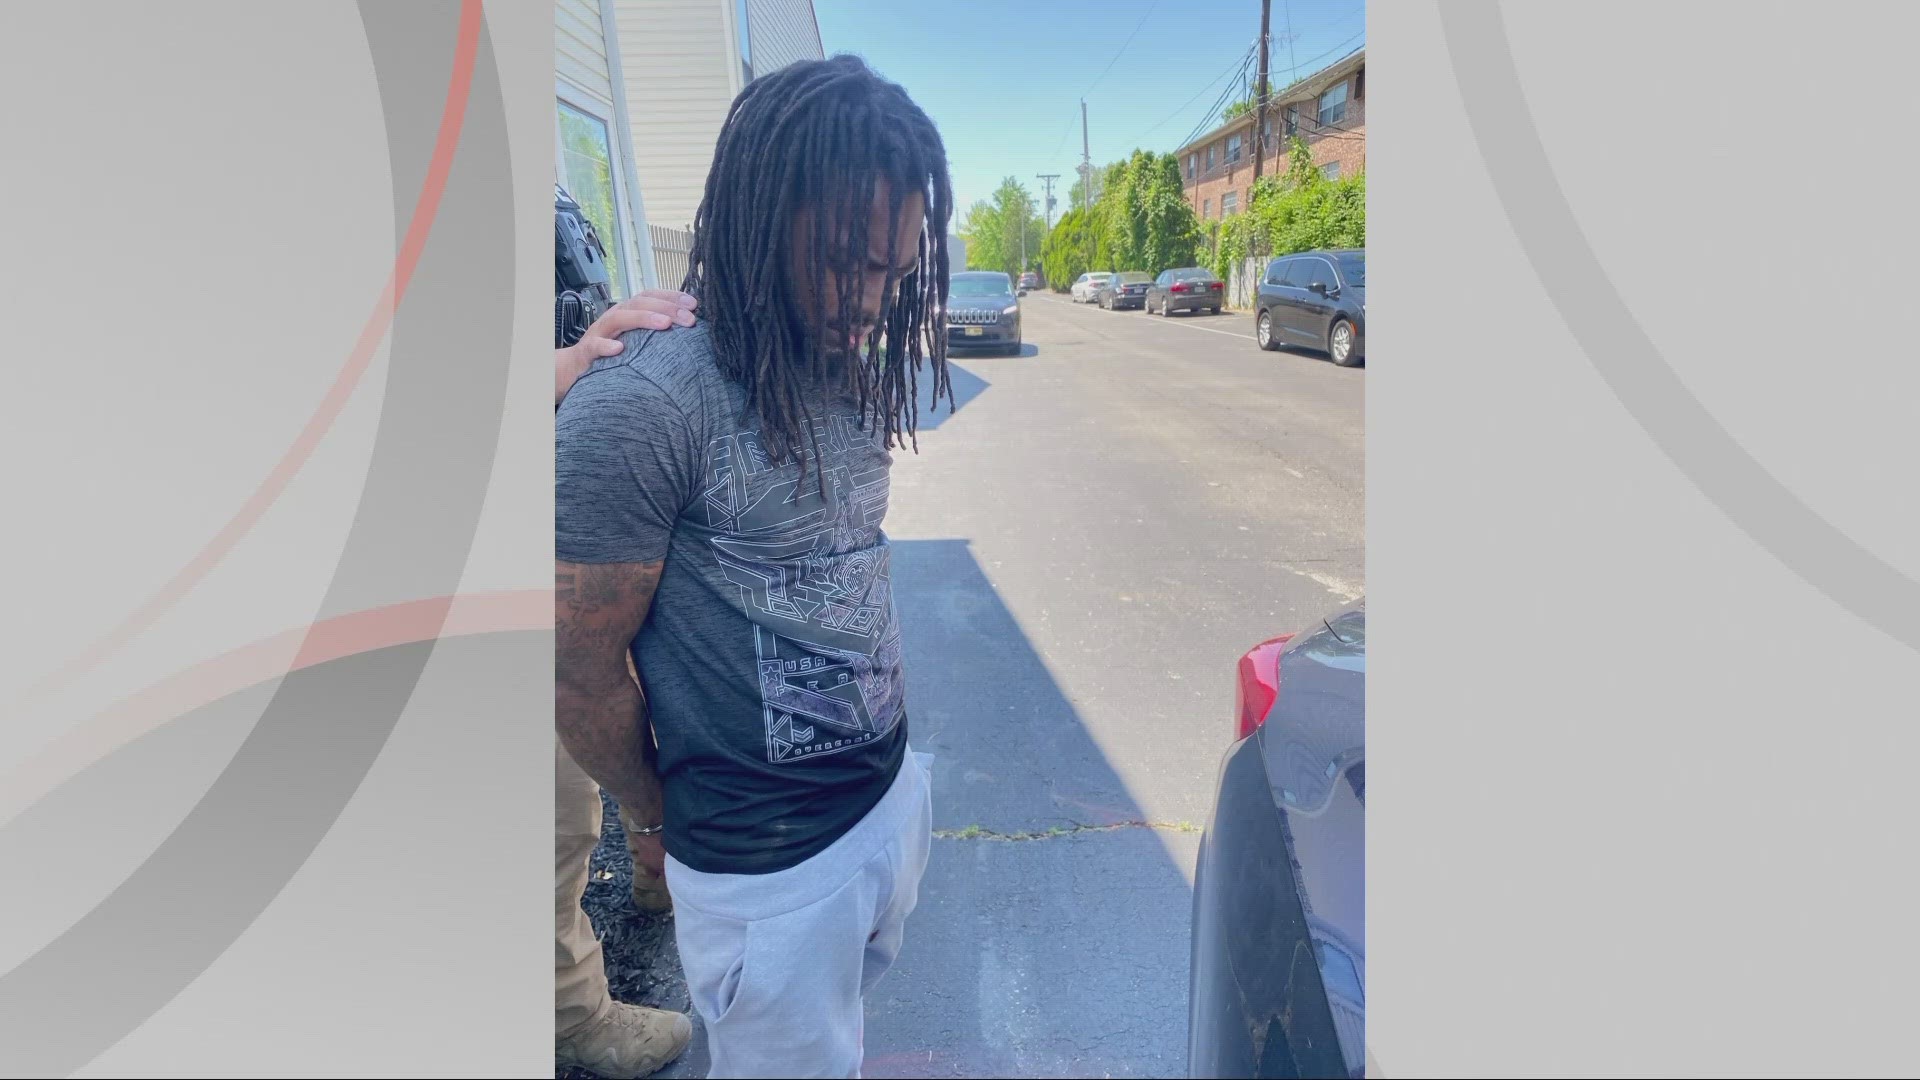 U.S. Marshals confirmed to 3News the arrest of Dacarrei Kinard in Columbus in connection to the fatal shooting of George Jensen earlier this month.